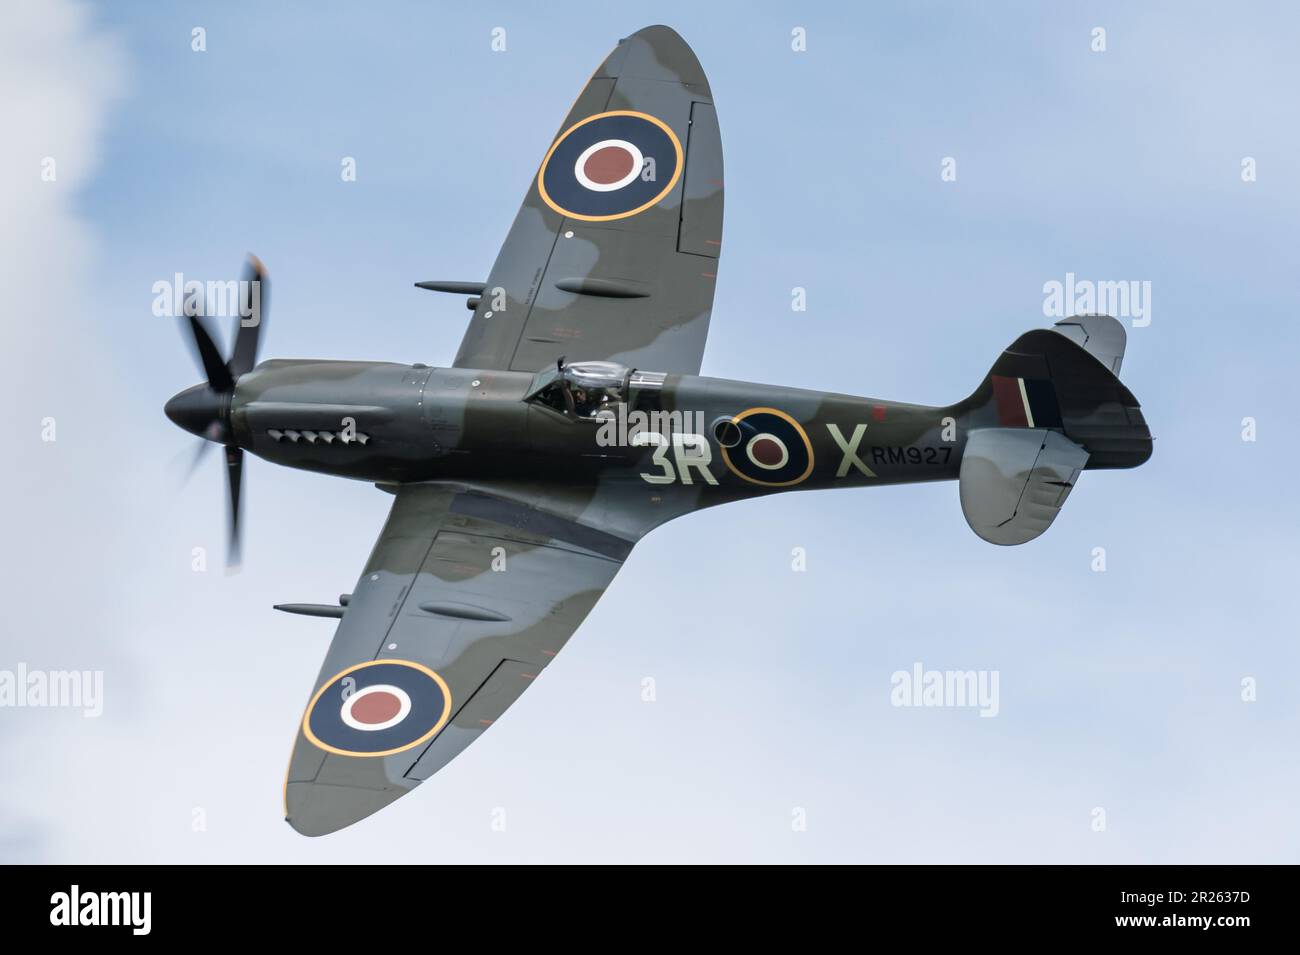 The Supermarine Spitfire is a British single-seat fighter aircraft used by the Royal Air Force and other Allied countries during WWII. Stock Photo